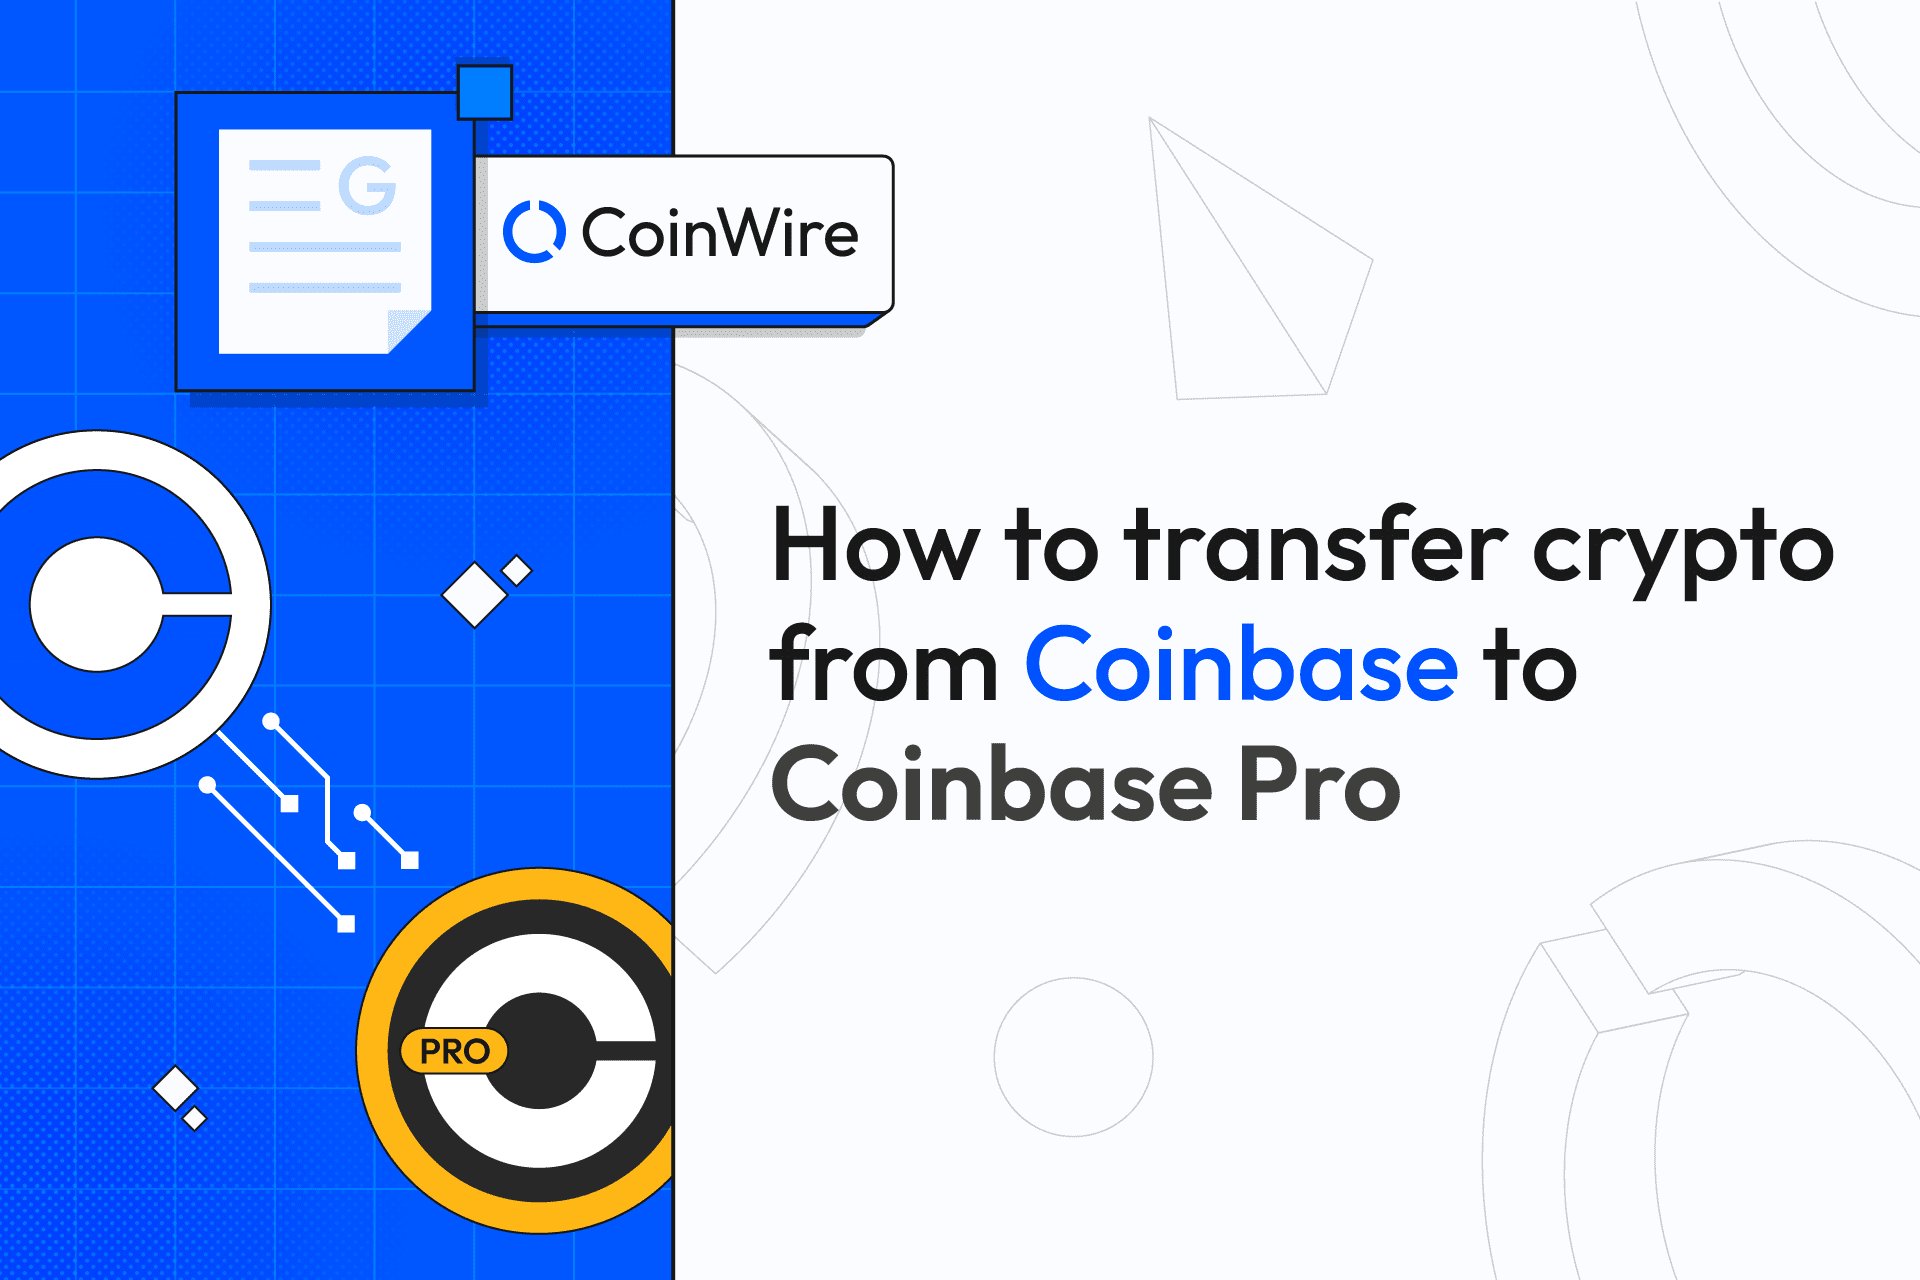 What Happened to Coinbase Pro?